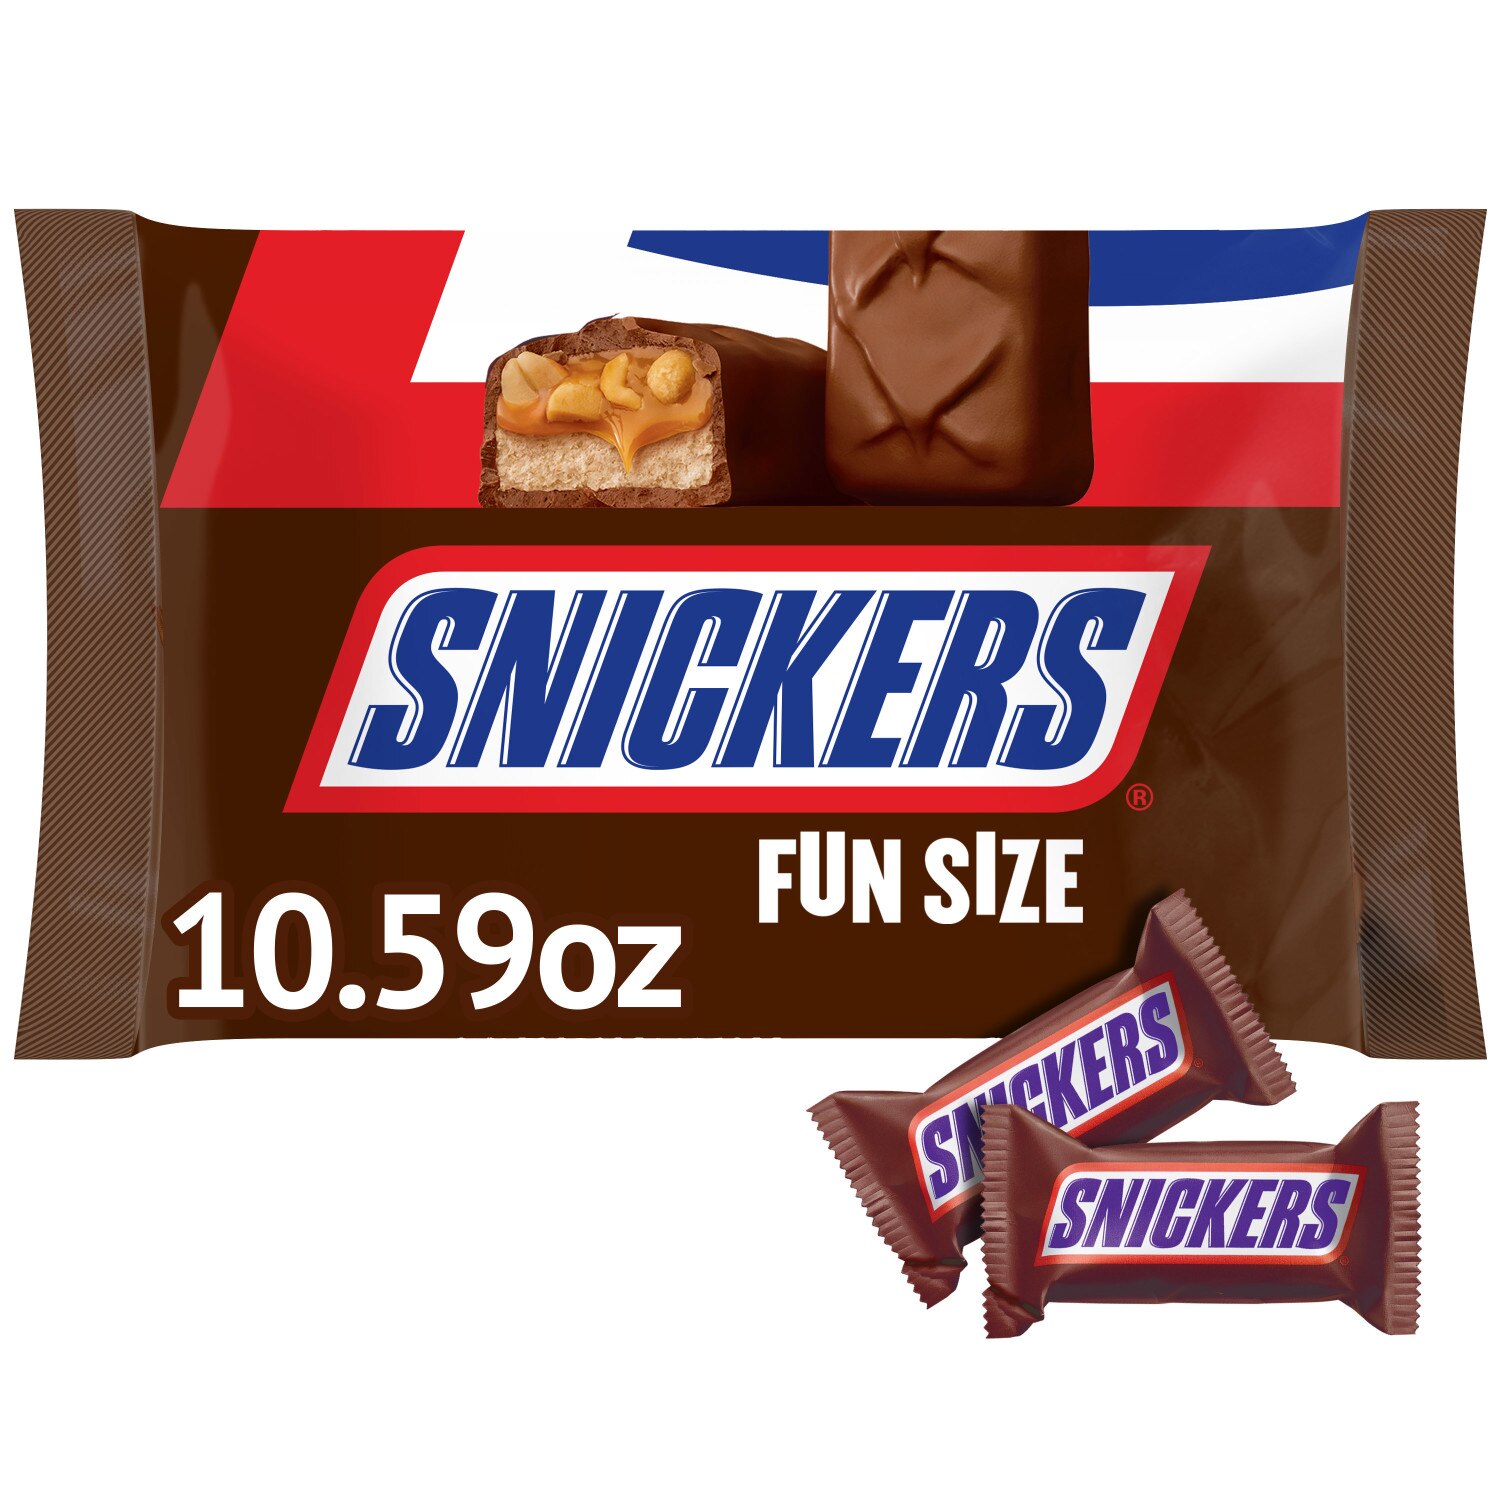  Snickers Chocolate Candy Bars, Fun Size, 10.59 OZ 